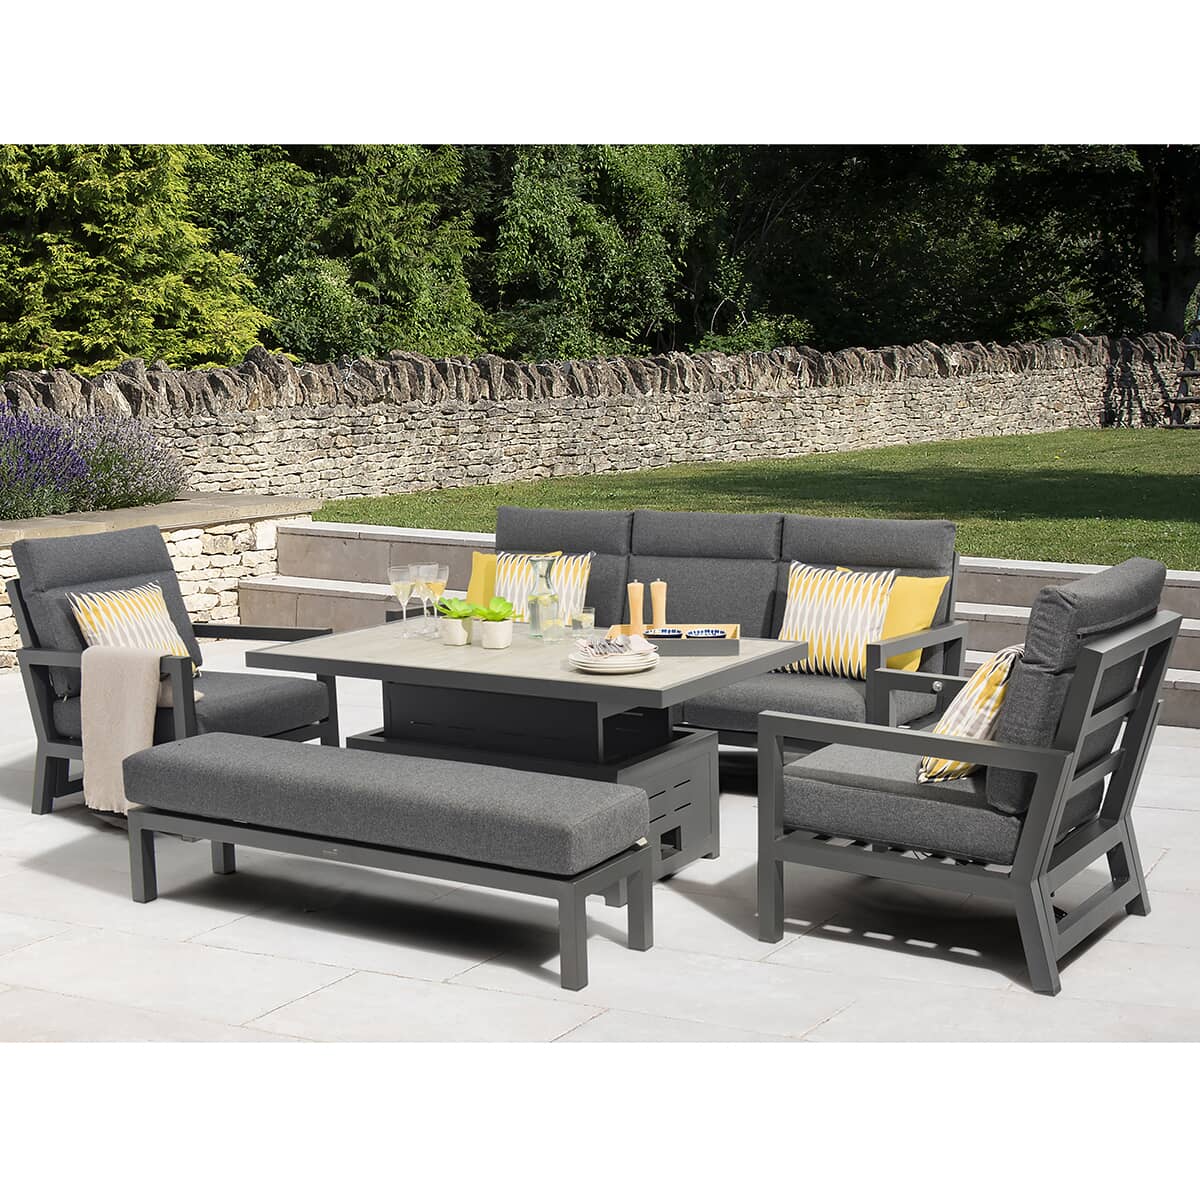 Bramblecrest La Rochelle Reclining 3 Seat Sofa with Adjustable Ceramic Top Dining Table